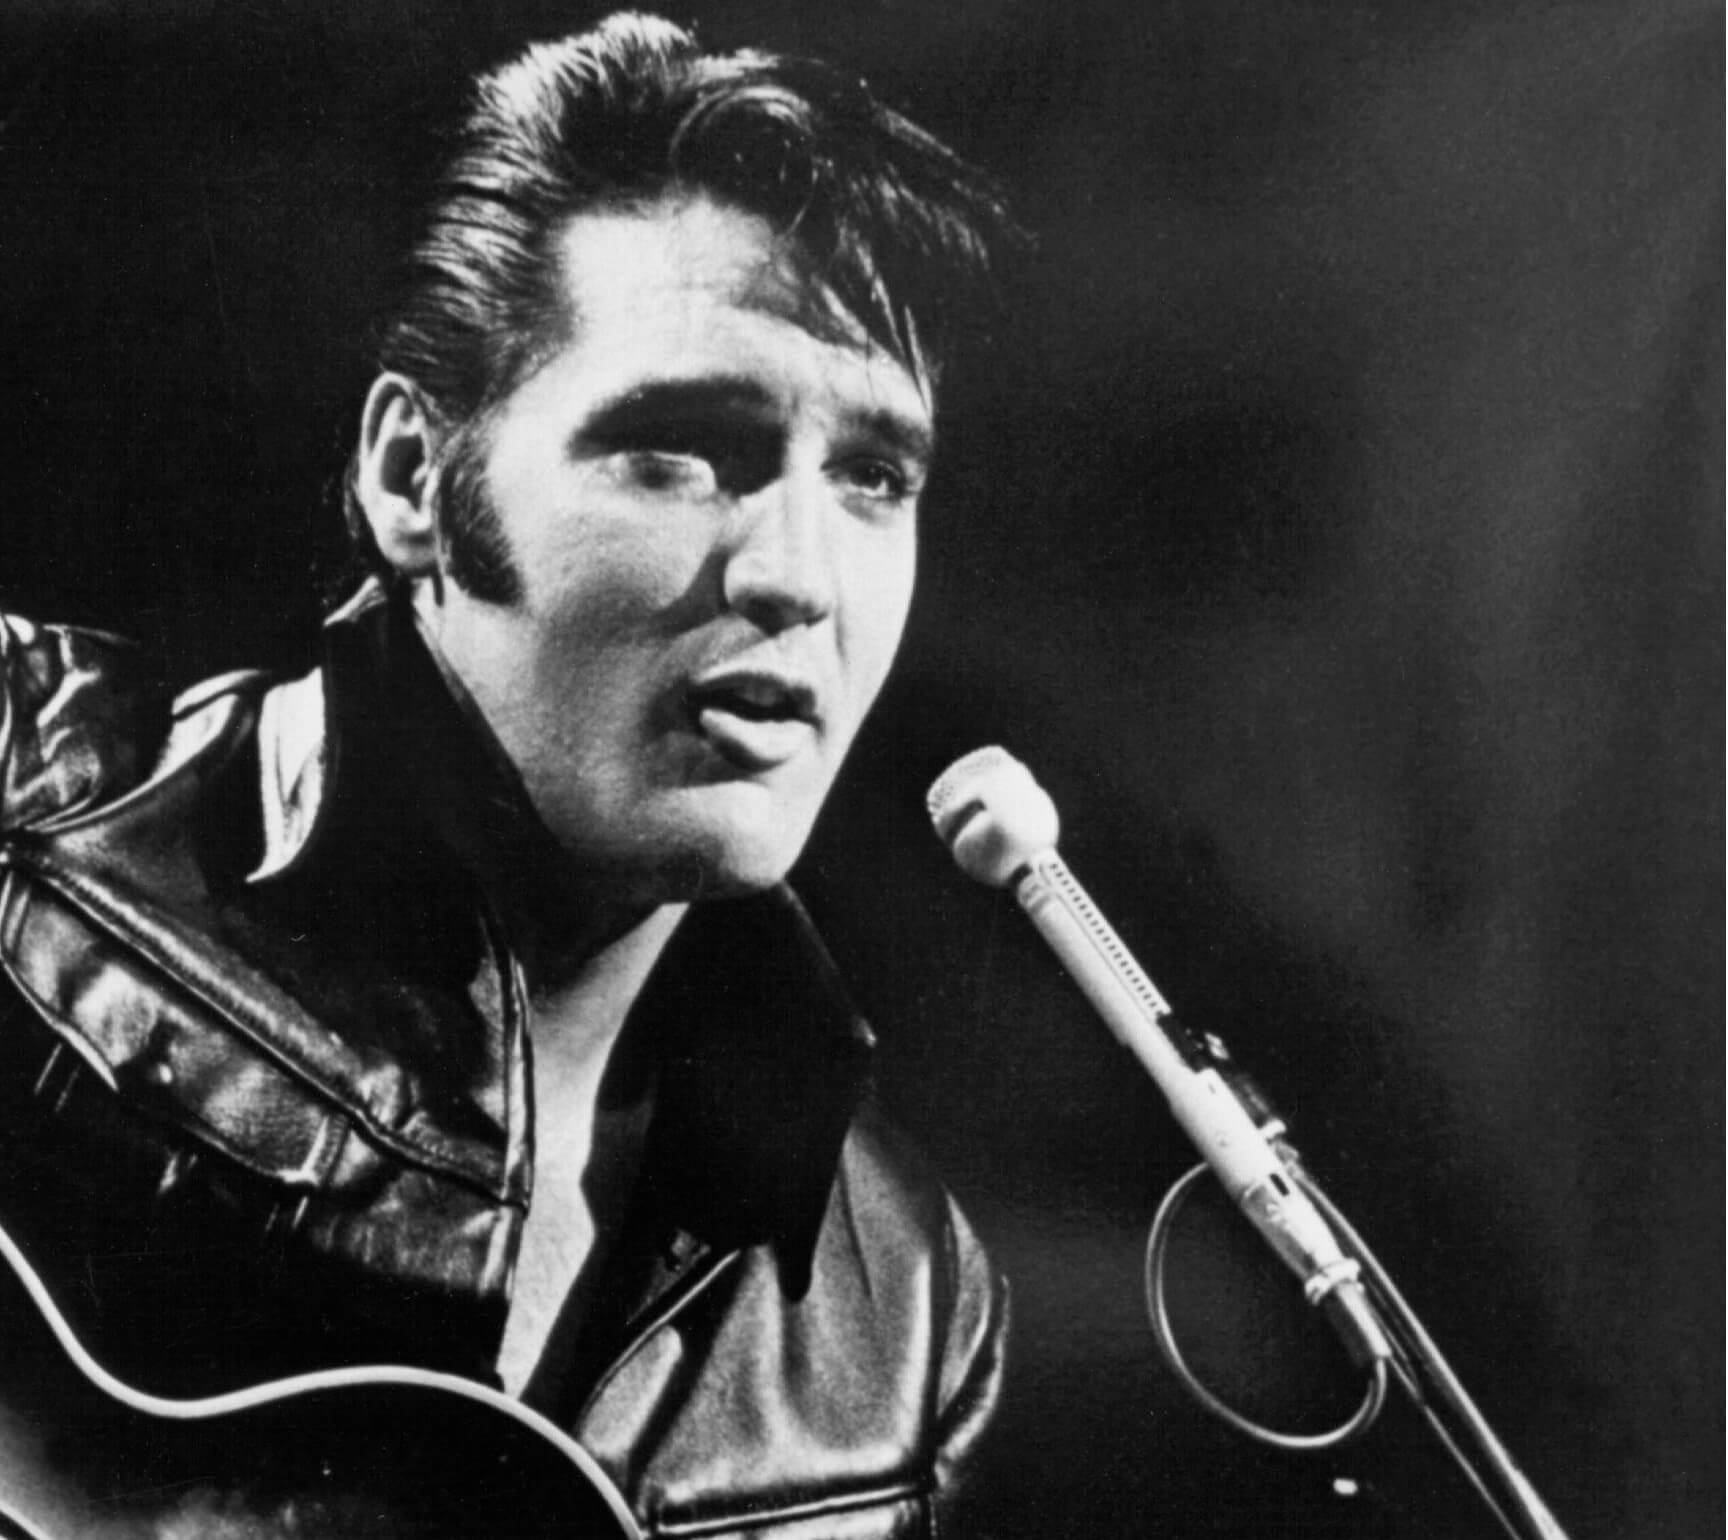 Elvis Presley wearing a jacket during the '68 Comeback Special'